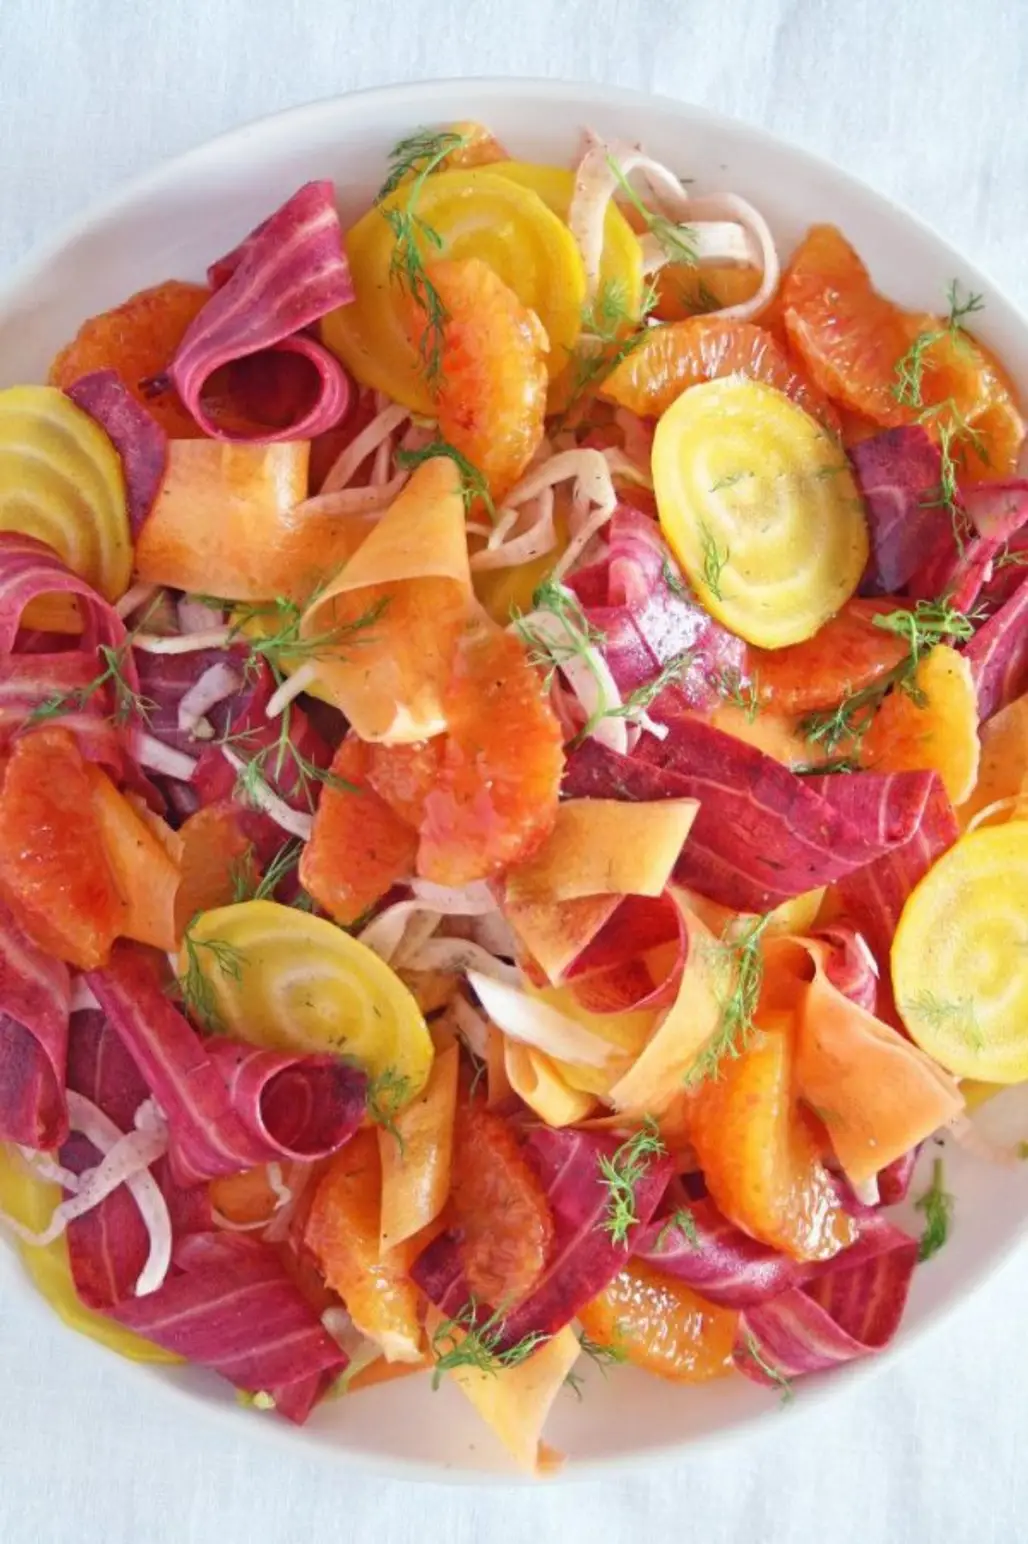 Beautiful Salad with Beets, Carrots, Fennel and Blood Orange